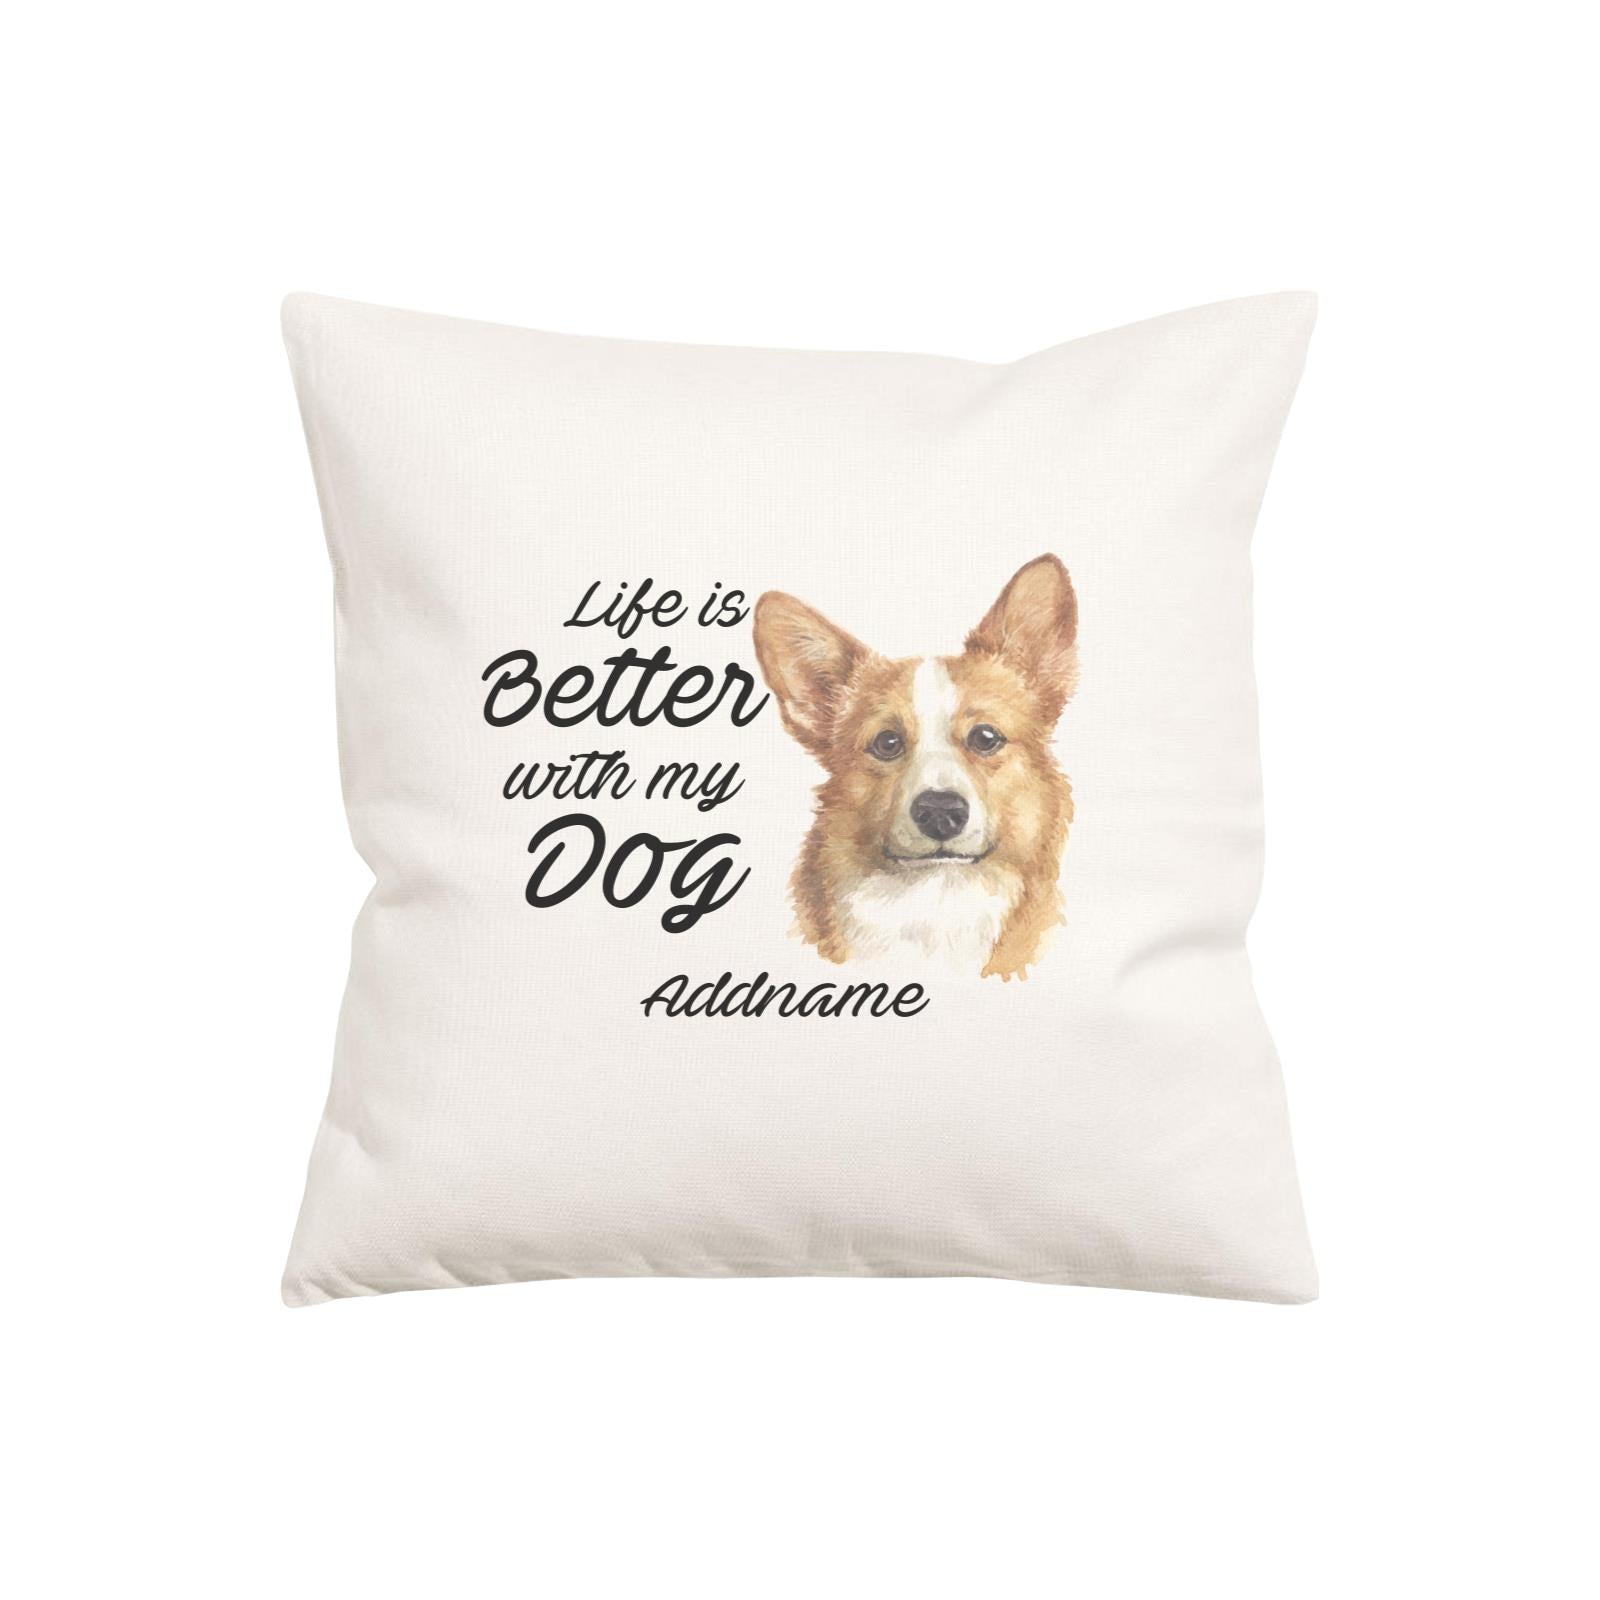 Watercolor Life is Better With My Dog Welsh Corgi Addname Pillow Cushion